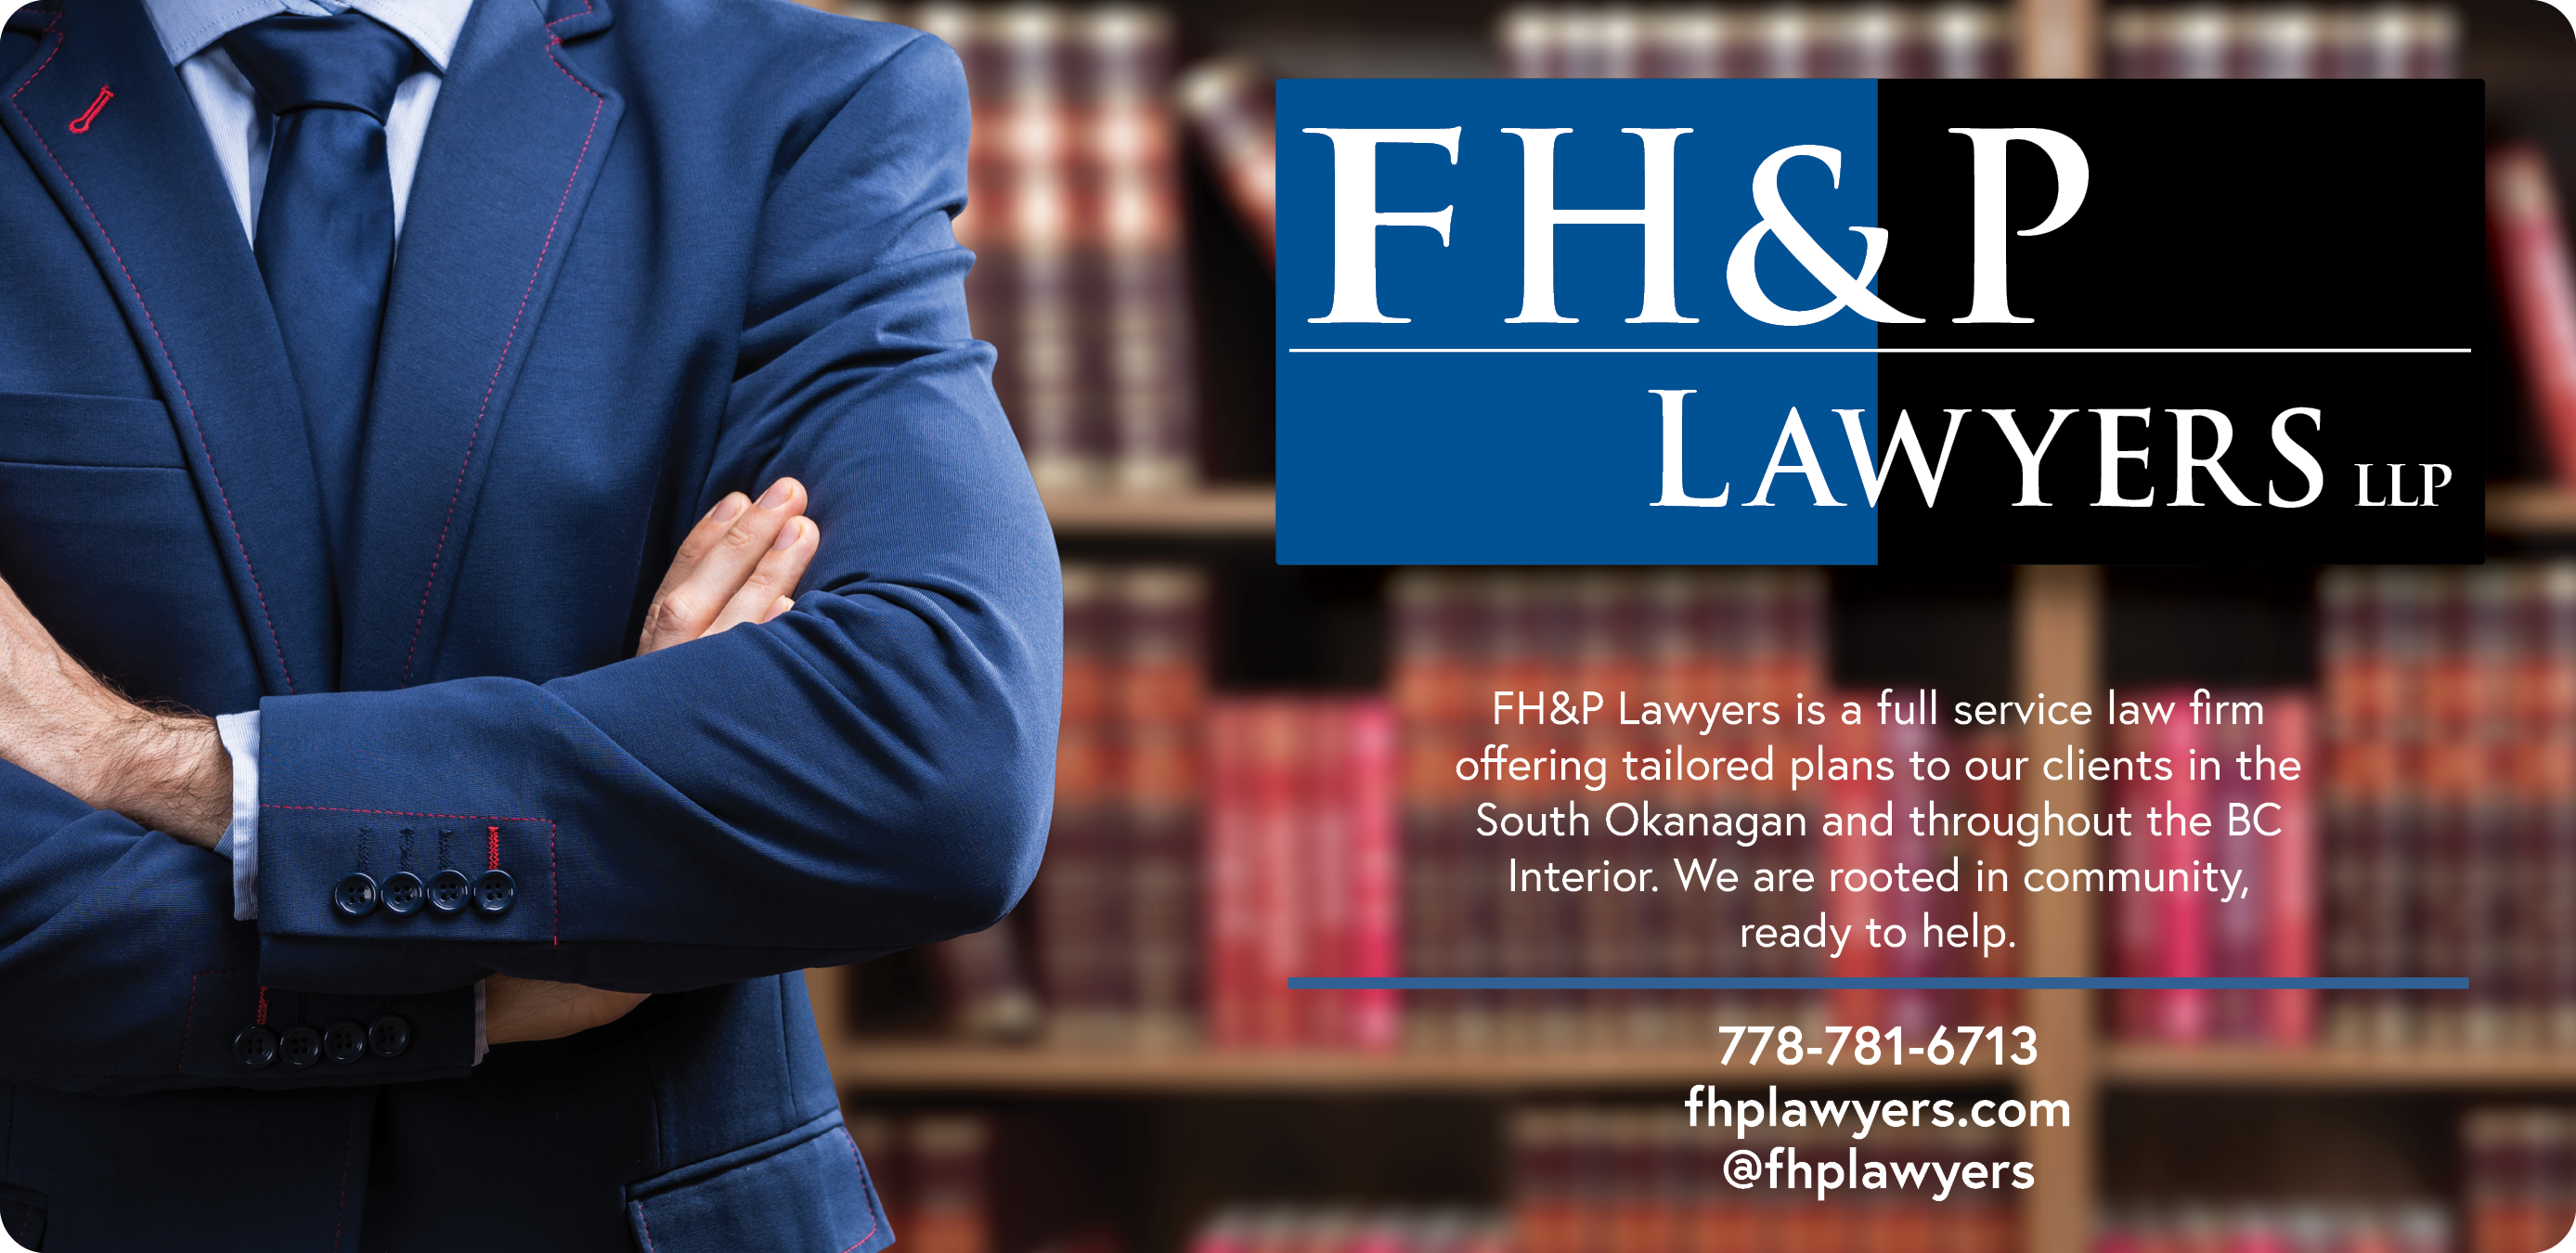 FH & P Lawyers LLP